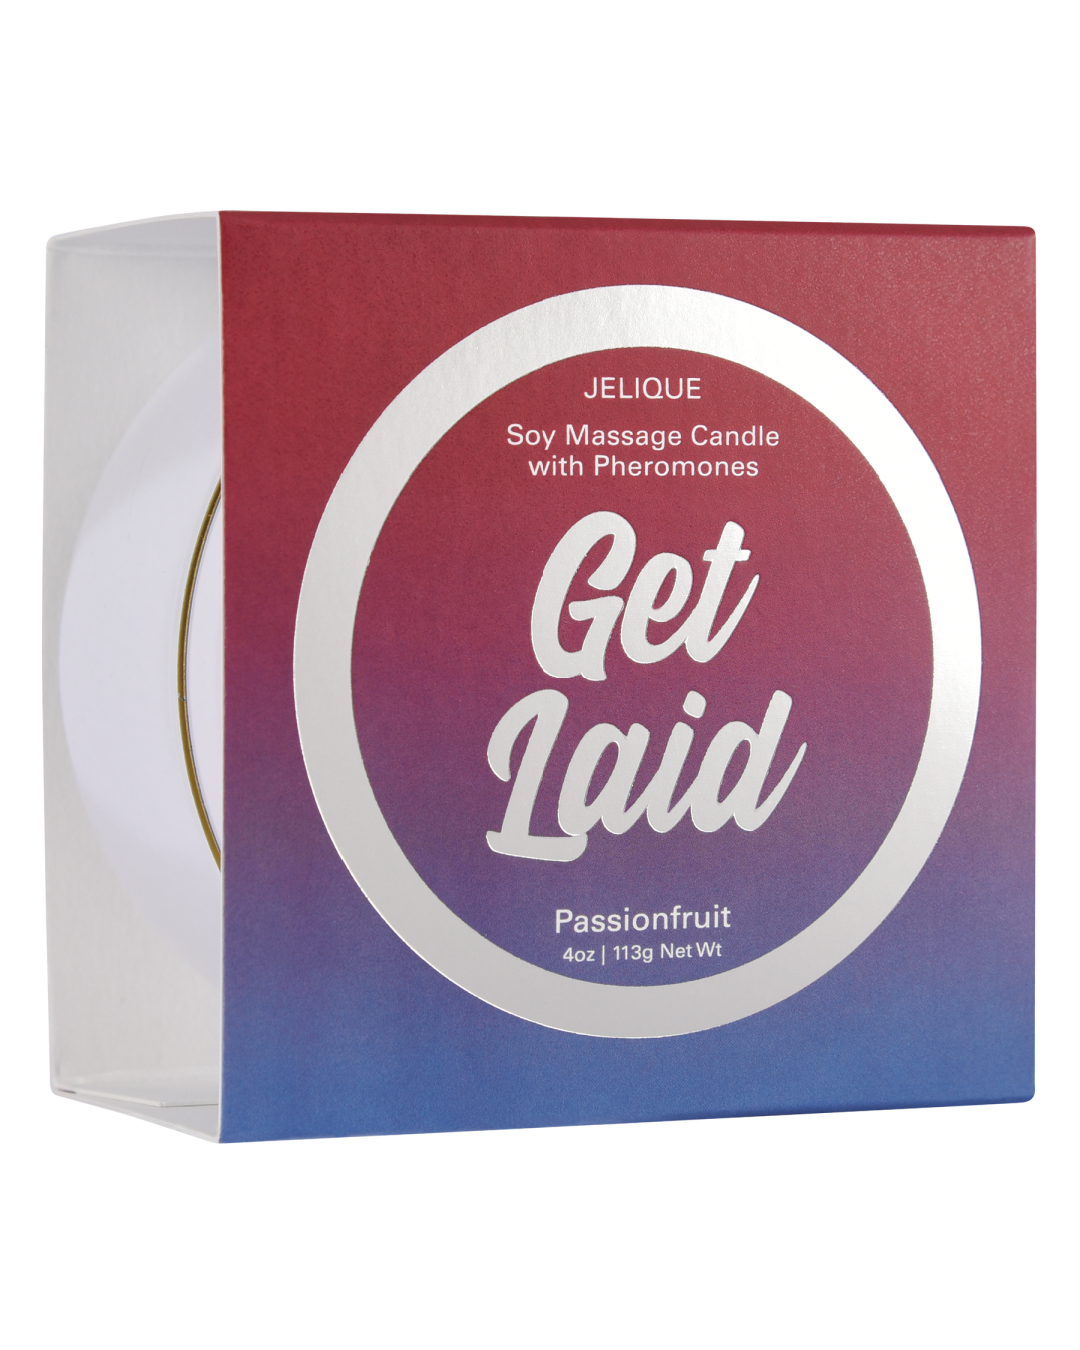 Get Laid Pheromone Massage Candle - Passion Fruit Scent front of package